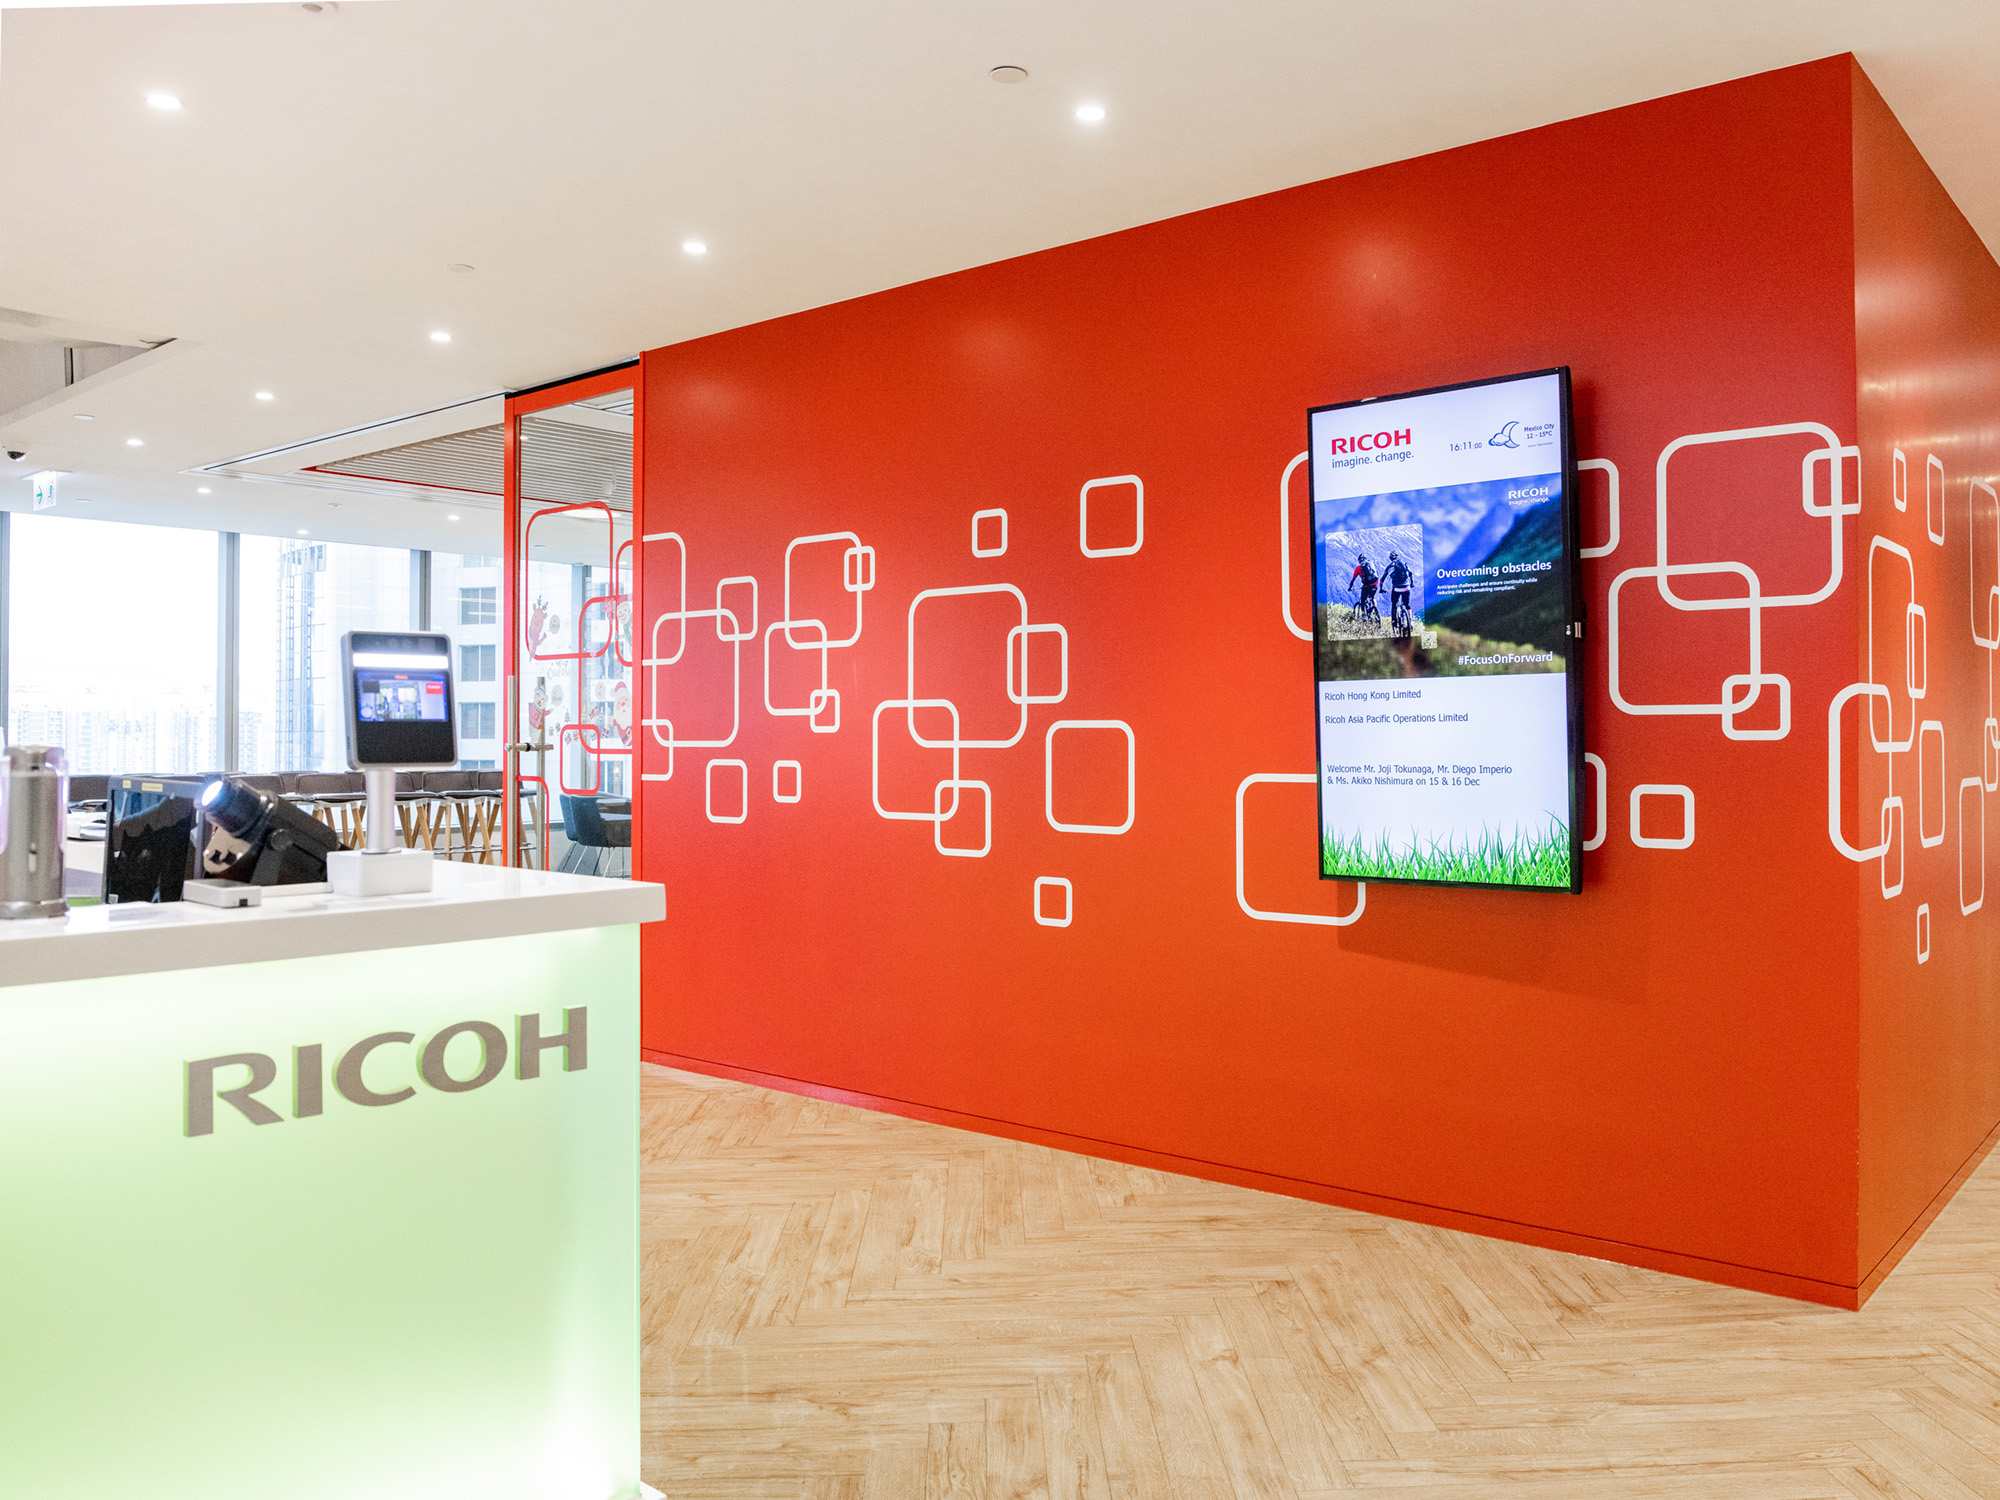 Ricoh is a world-leading workplace technology provider driving digital workplace transformation